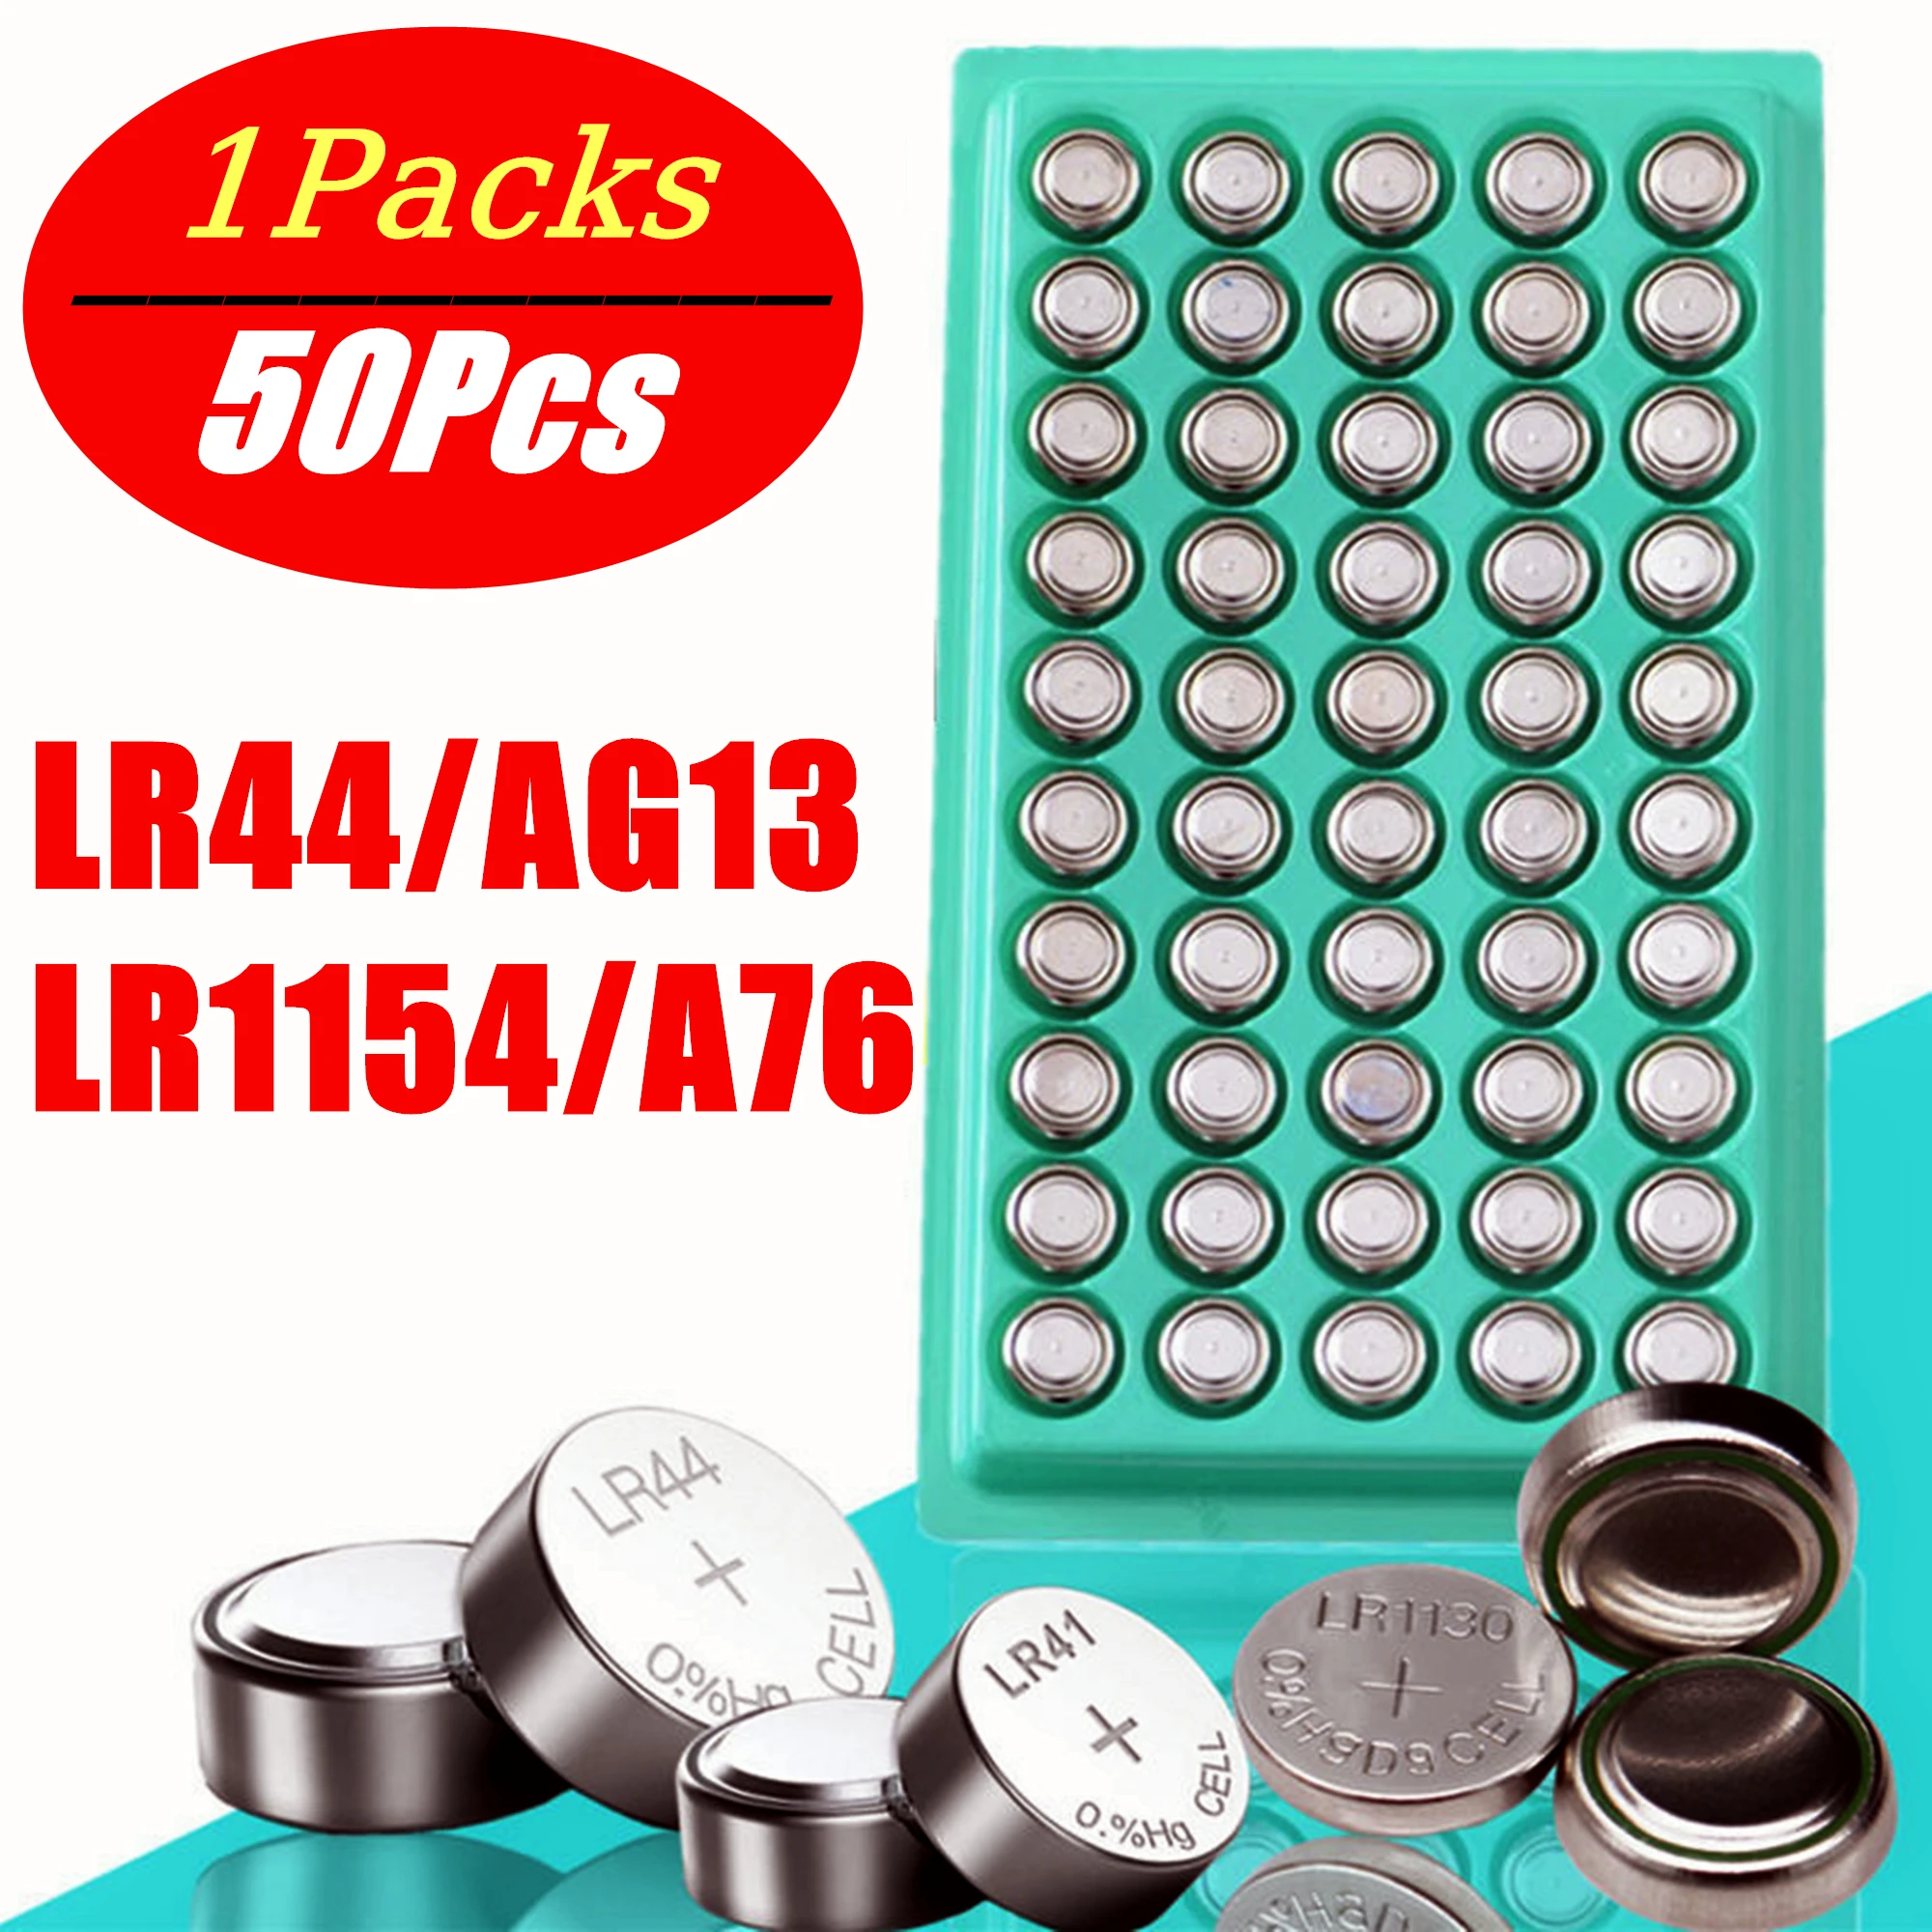 50Pcs New AG13 LR44 357A A76 303 SR44SW SP76 L1154 RW82 RW42 Coin Cell Battery For Watch Calculator Remote Kids Toys